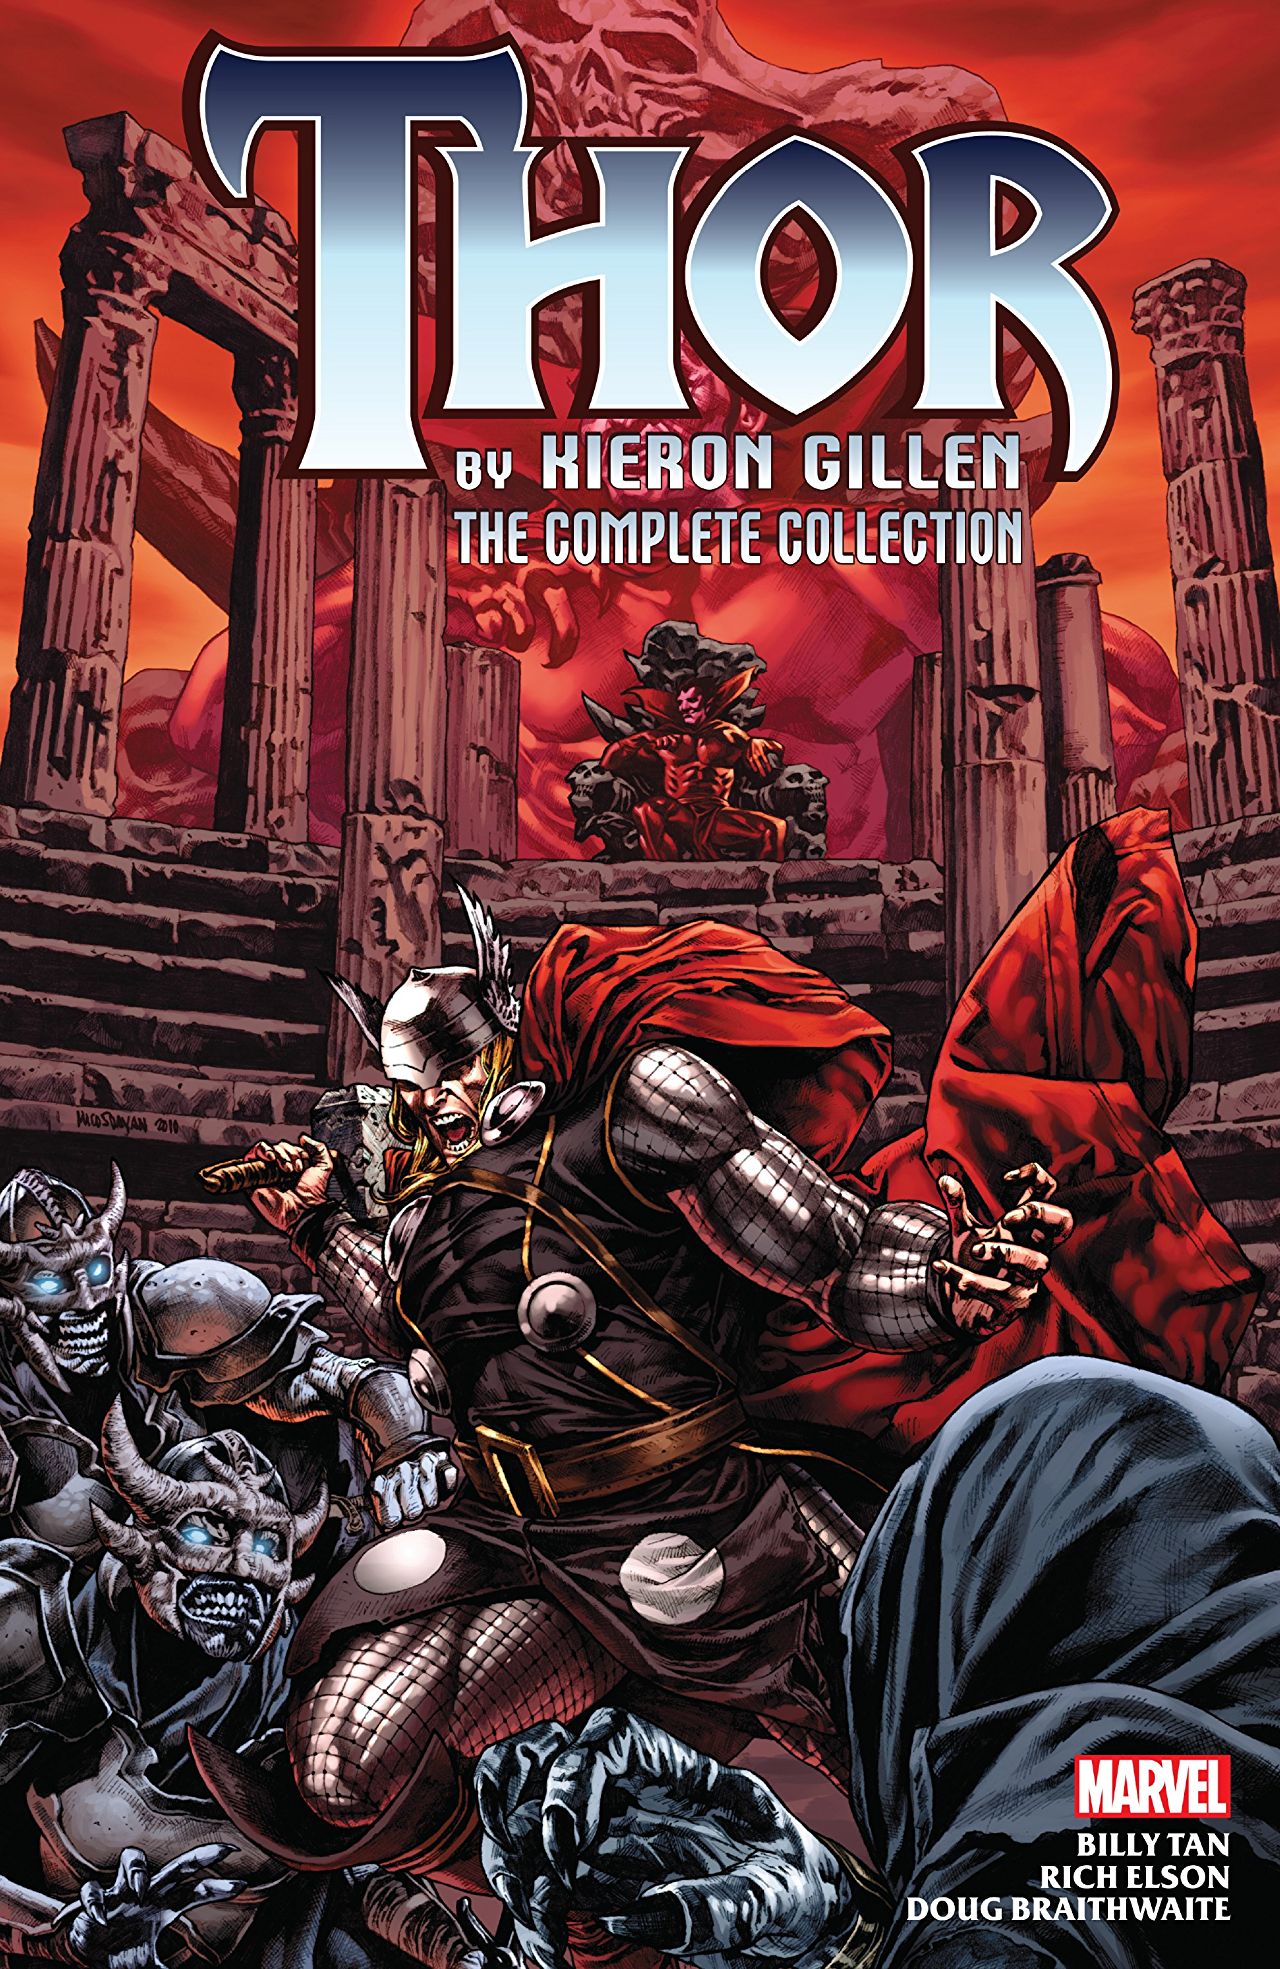 Thor by Kieron Gillen: The Complete Collection (Trade Paperback)